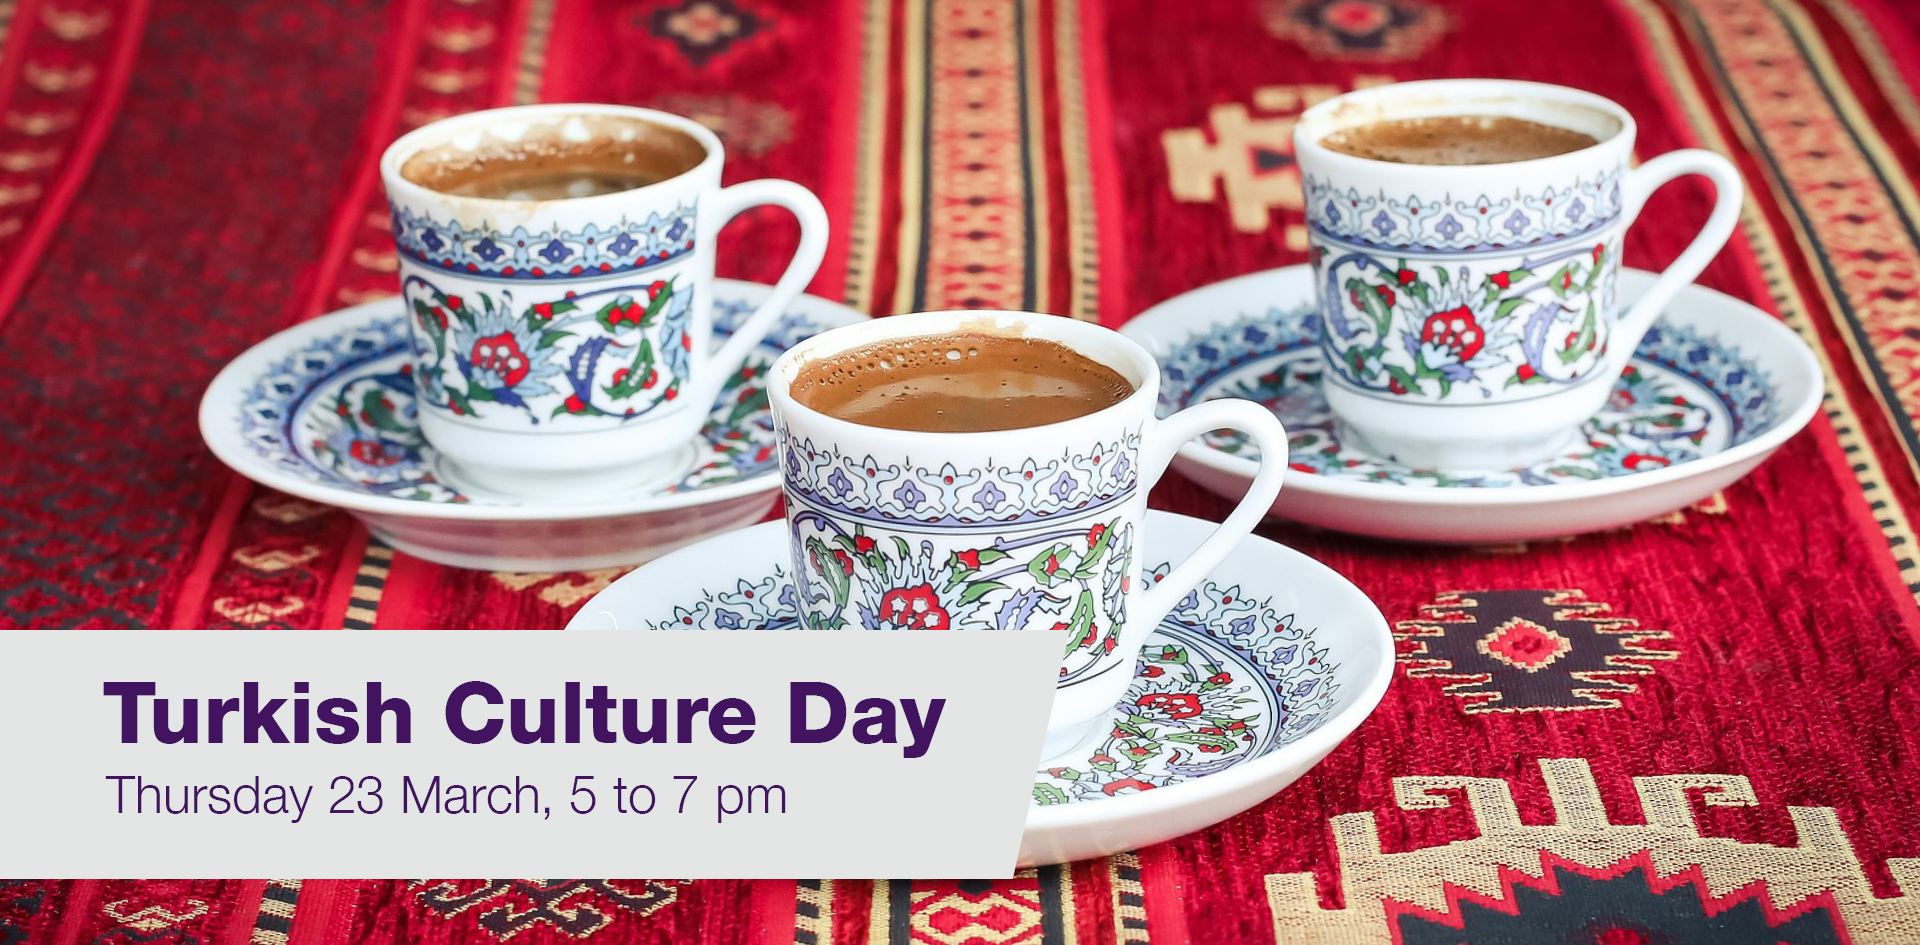 Turkish culture day, Thursday 23 March, 5 to 7 pm